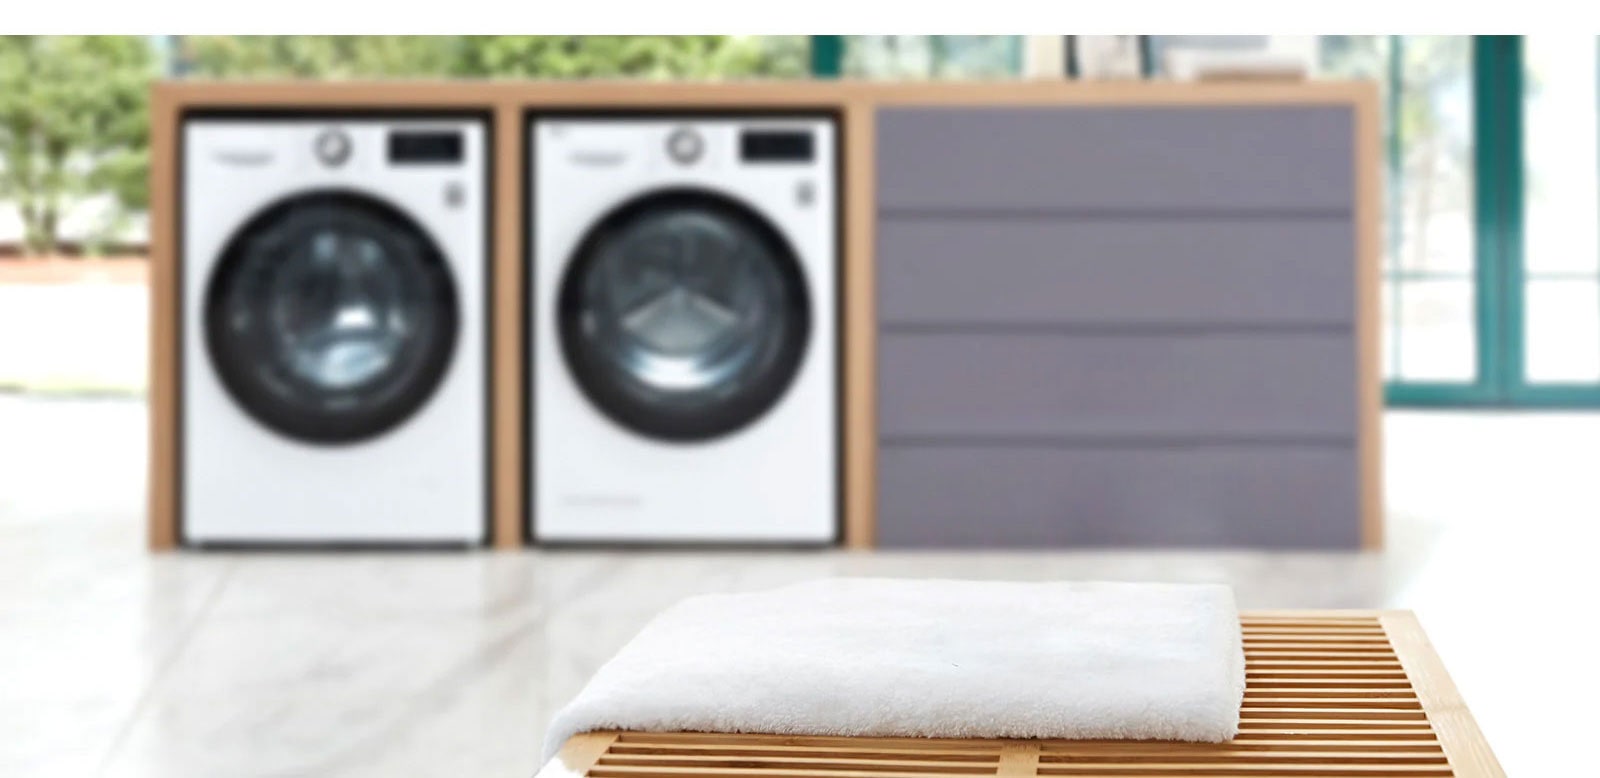 Background of the image is two washing machine front loading washers in a built in folding station slightly blurred with the LG ThinQ sitting on a towel on a table in the foreground.